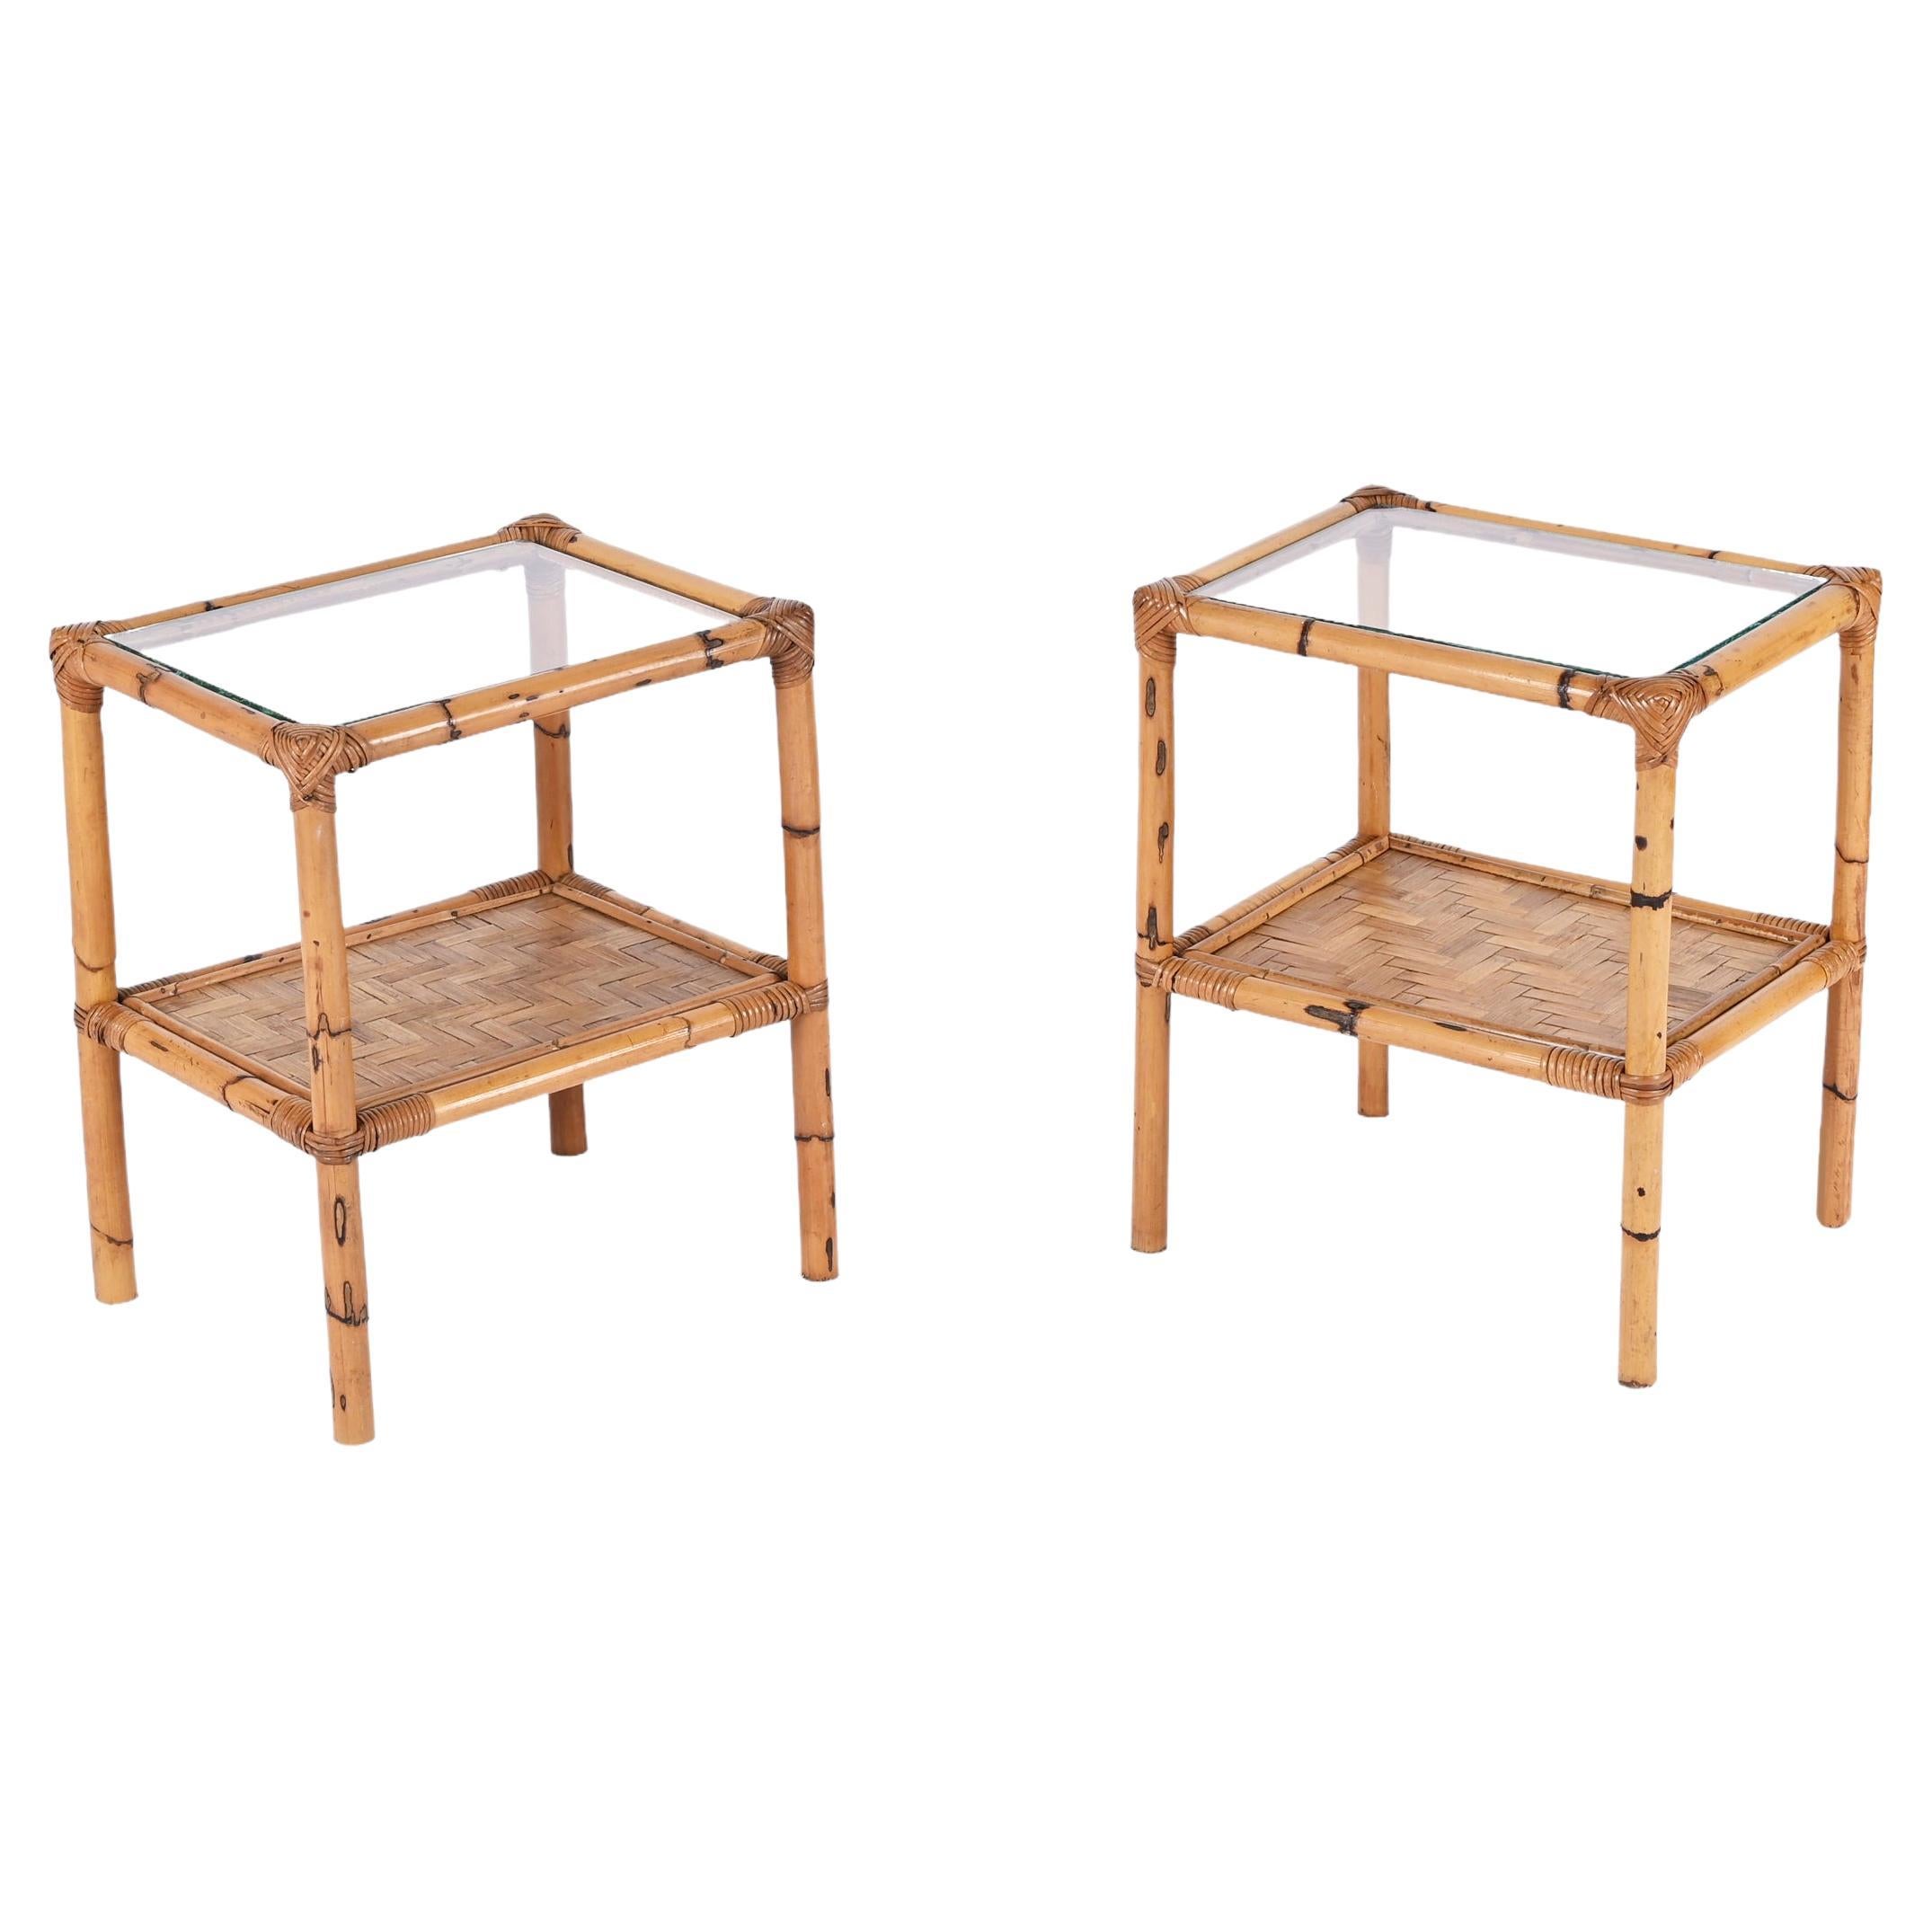 Pair of Mid-Century Italian Bedside Tables in Bamboo, Rattan and Glass, 1970s For Sale